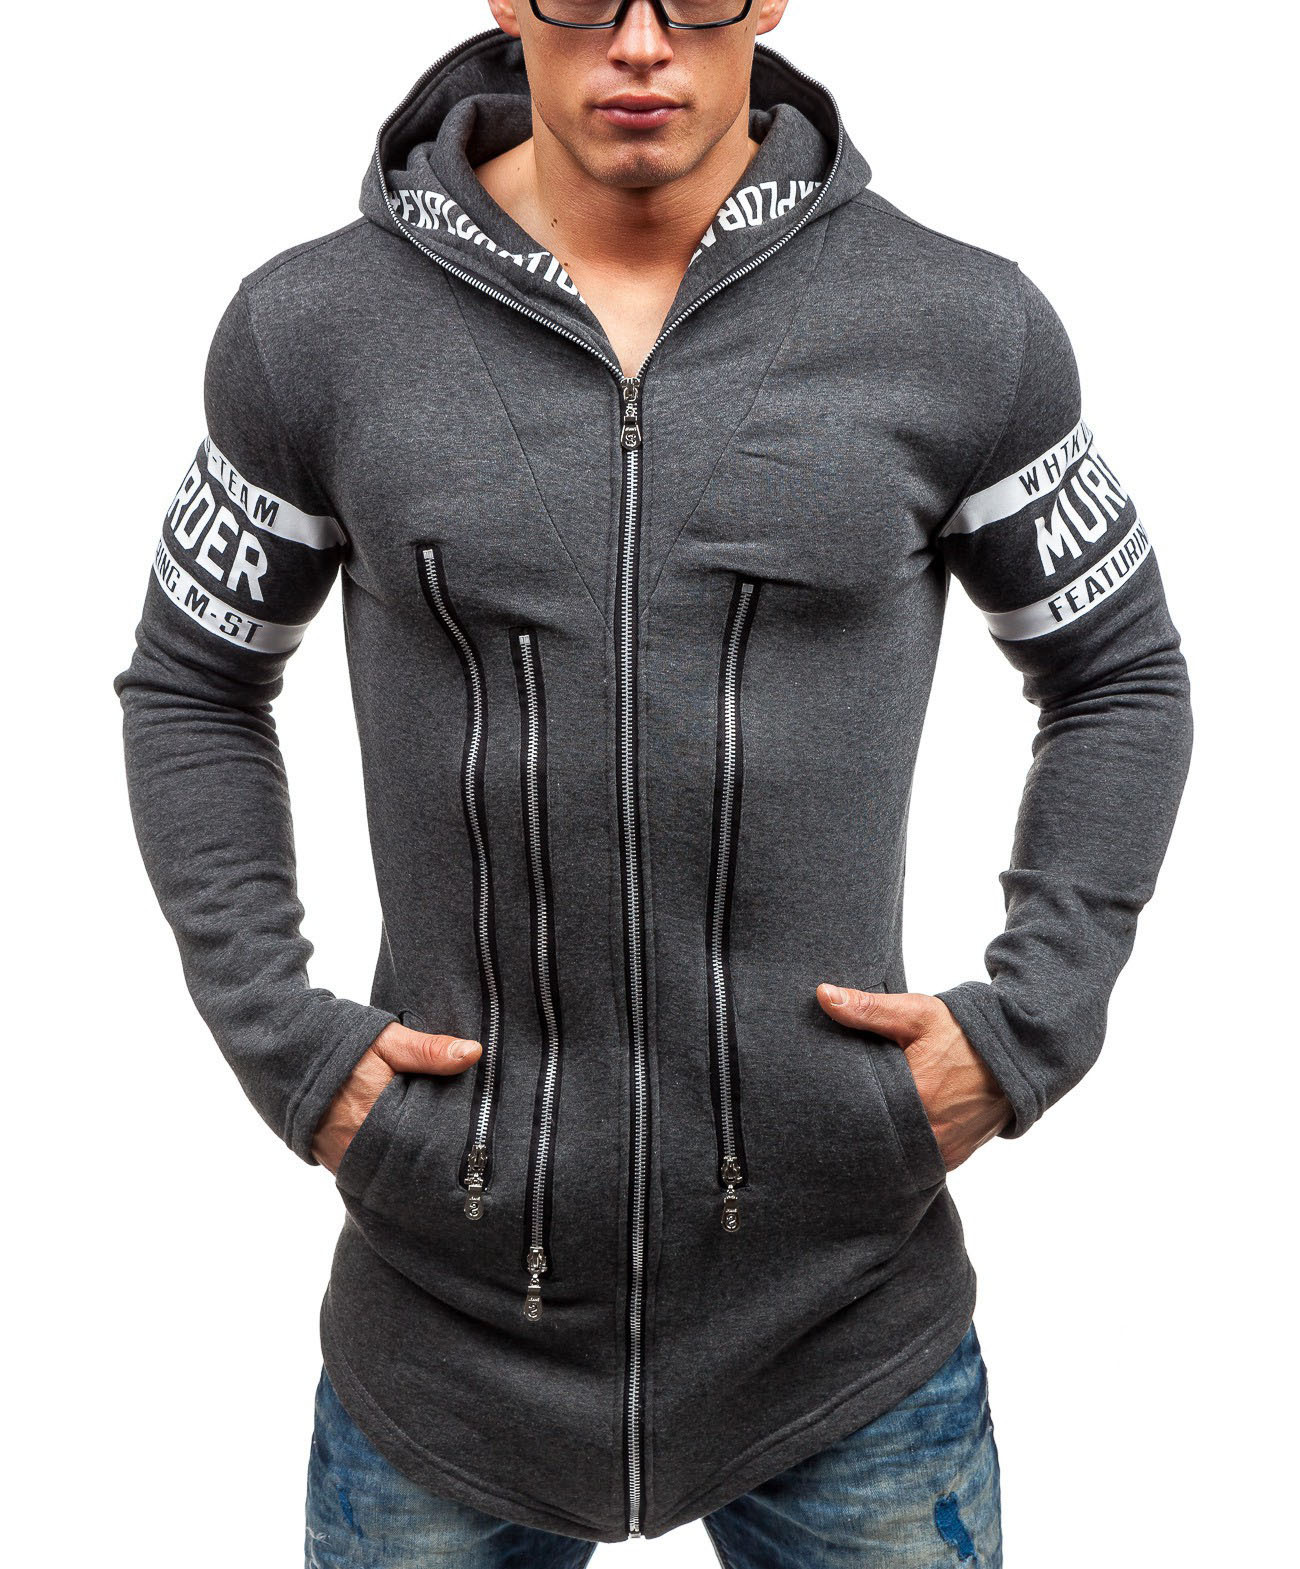 HD-DST-2016-autumn-and-winter-fashion-men39s-hoodies-casual-slim-fit-cotton-printing-hooded-coat-per-32770037440